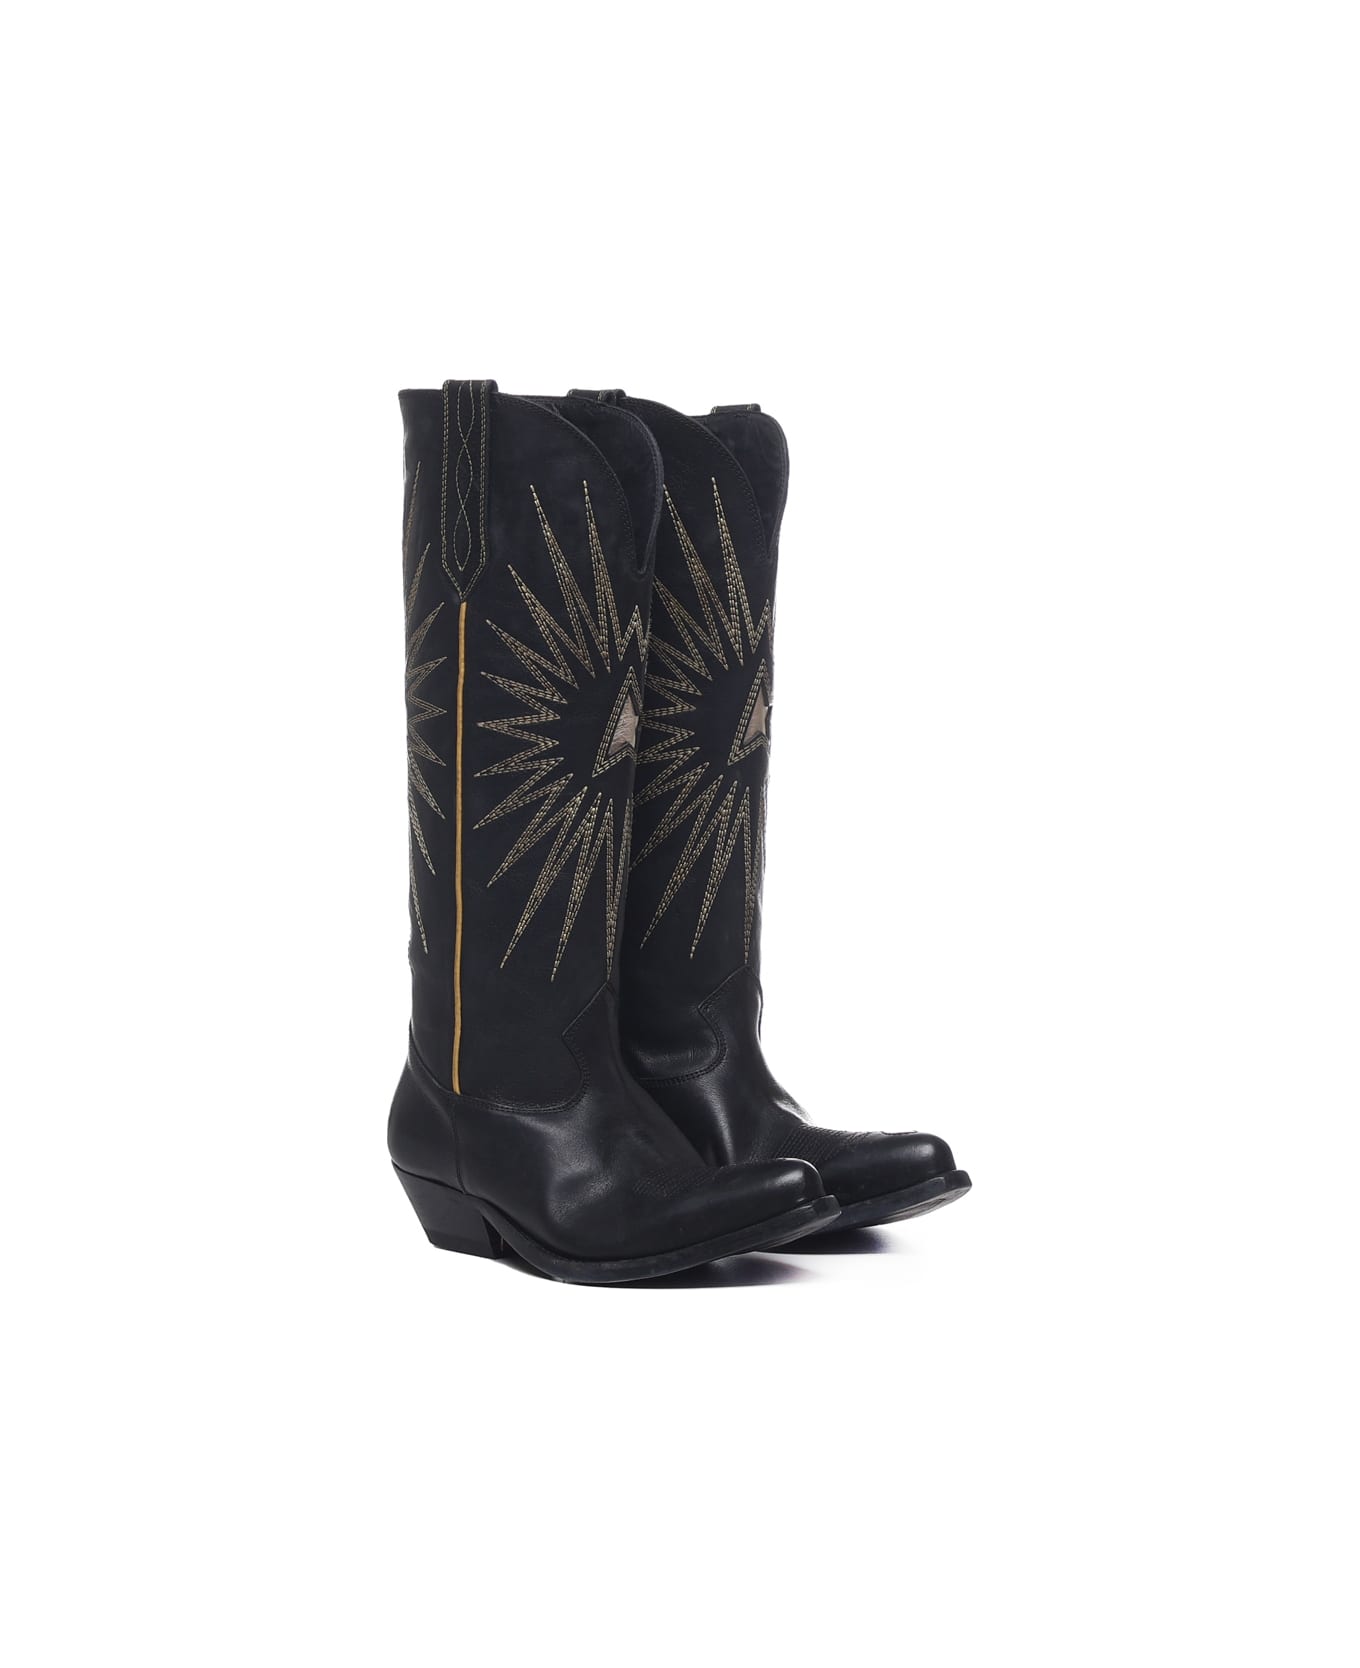 Golden Goose Wish Star Boots In Black Leather With Inlaid Star - Black